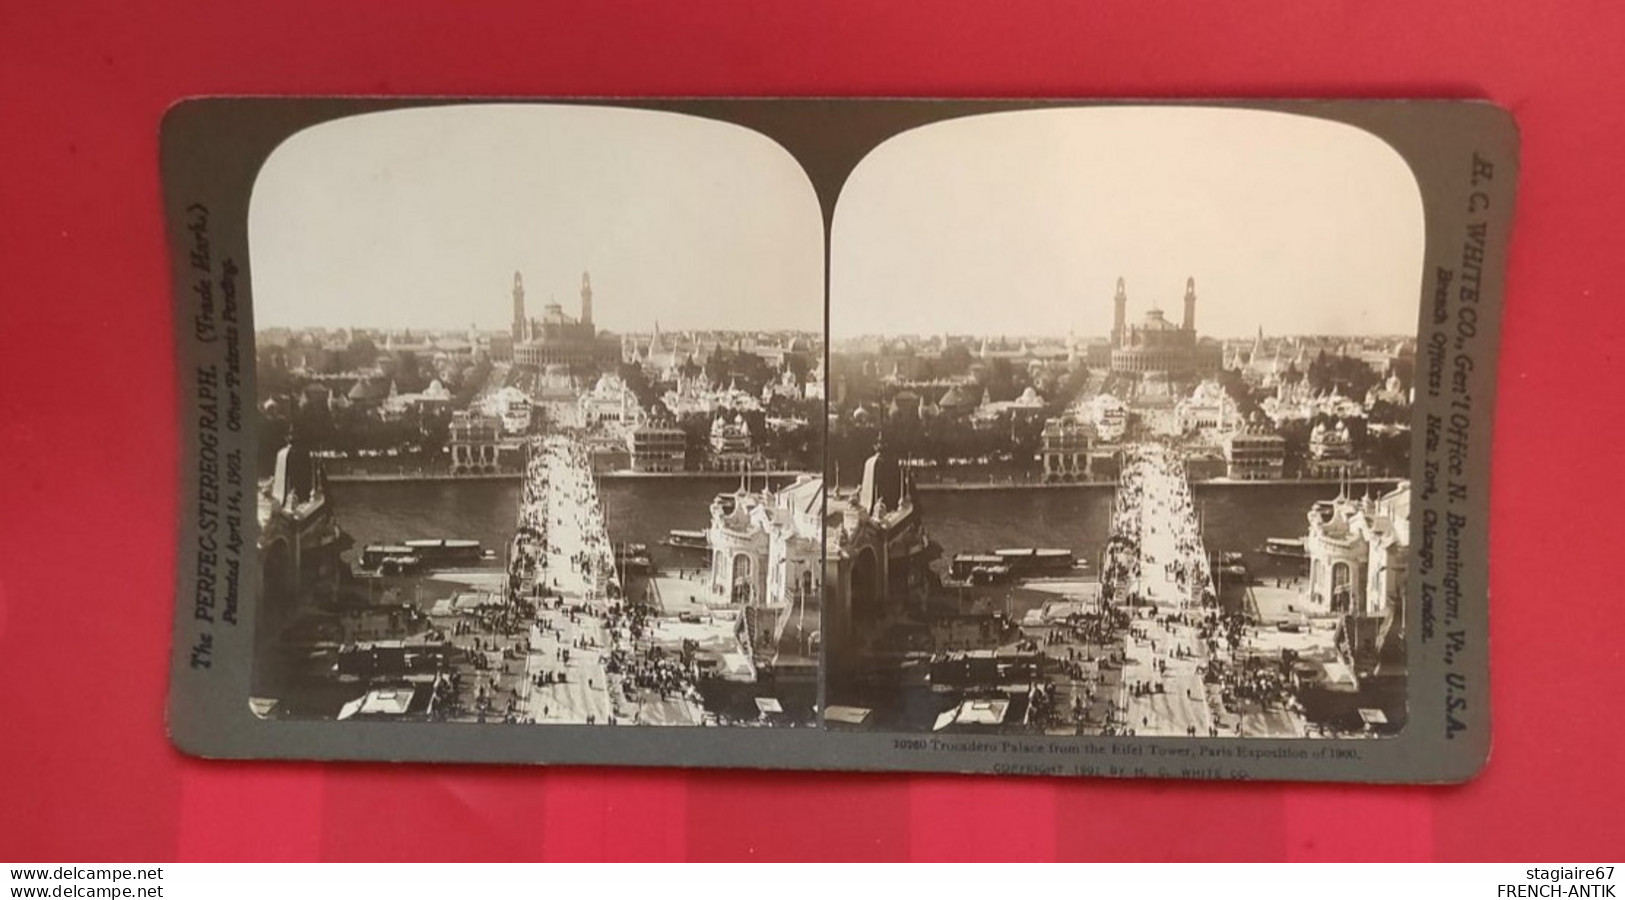 STÉRÉO H.C. WHITE CO USA TROCADERO PALACE FROM THE EIFEL TOWER PARIS EXPOSITION OF 1900 - Stereo-Photographie